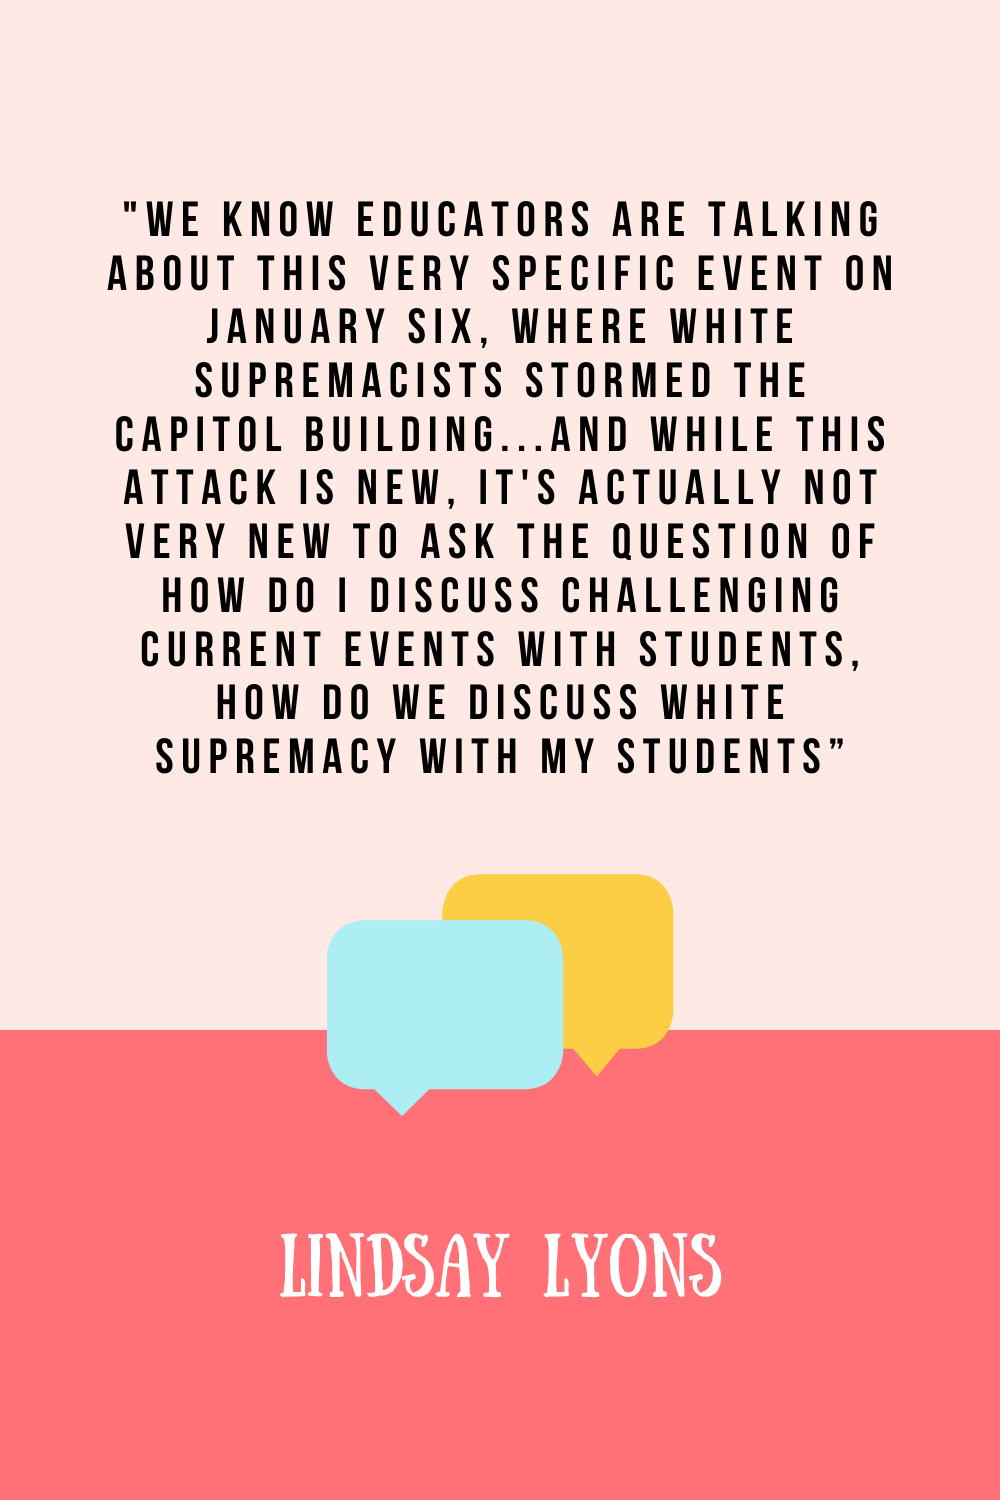 16. How do we talk about the attack on the capitol with white students. After the attack on the capitol, it is important to have discussions with white students about privilege and racism. Read the Time for Teachership blog post by Lindsay Lyons for how to have these difficult conversations. For more educational equity & teacher tips, sign up for weekly emails at bit.ly/lindsayletter